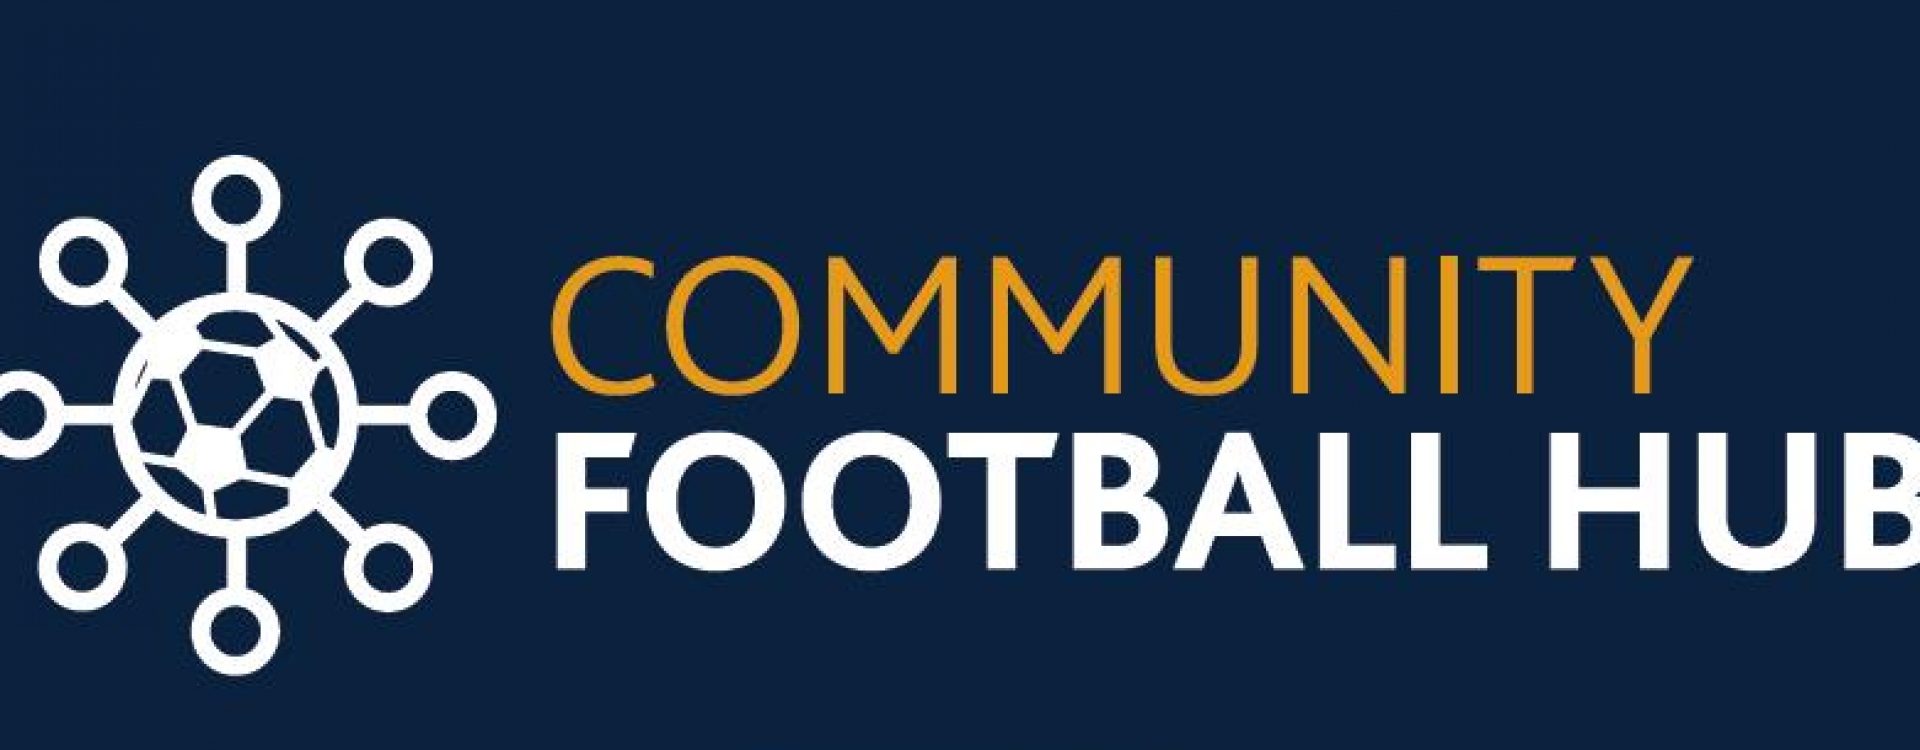 Flyer advertising opening event for community football hub